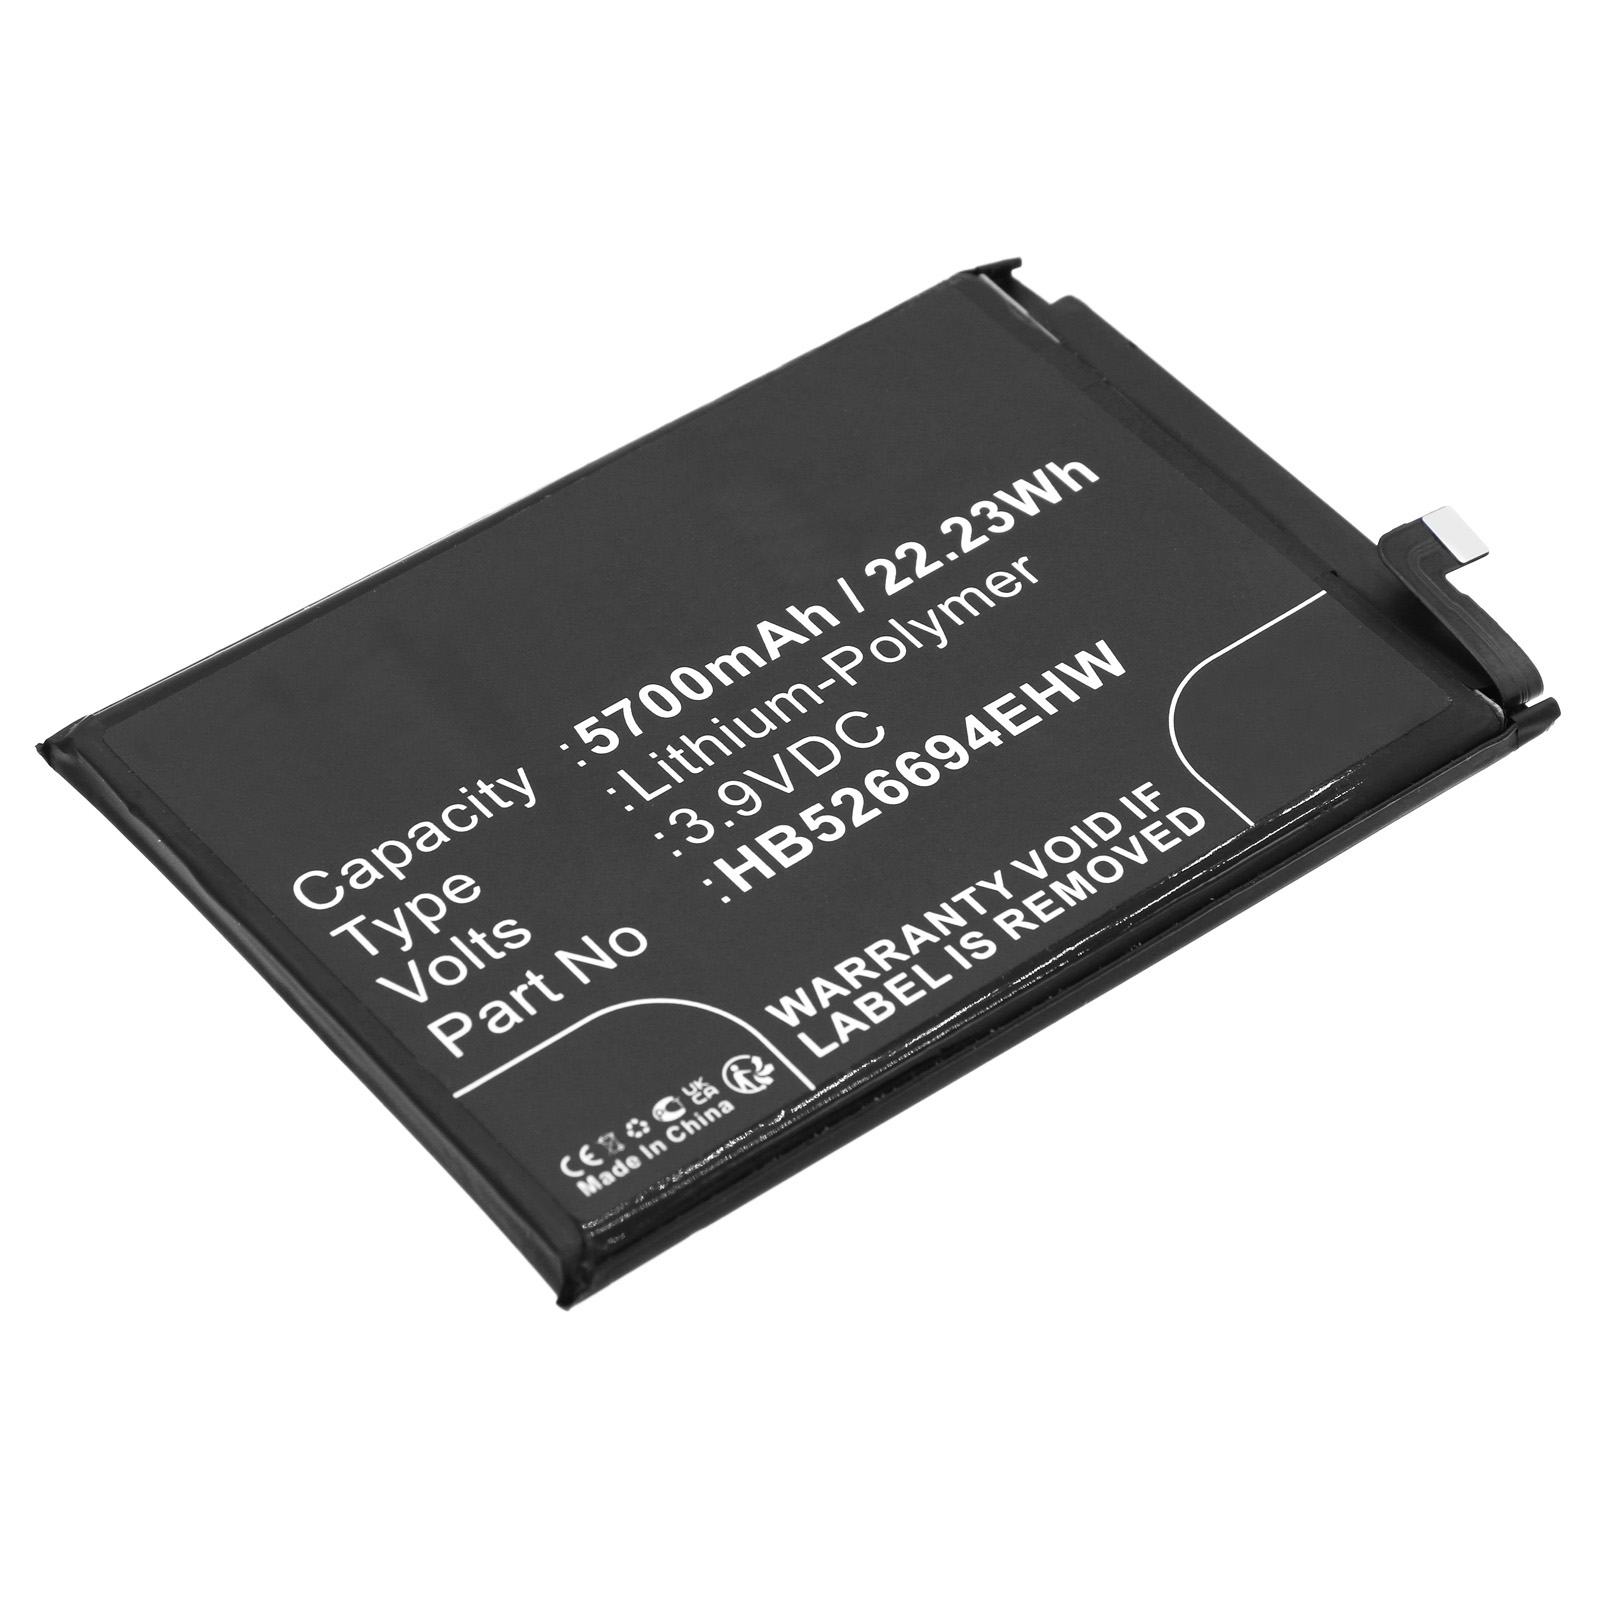 Synergy Digital Cell Phone Battery, Compatible with Honor HB526694EHW Cell Phone Battery (Li-Pol, 3.9V, 5700mAh)